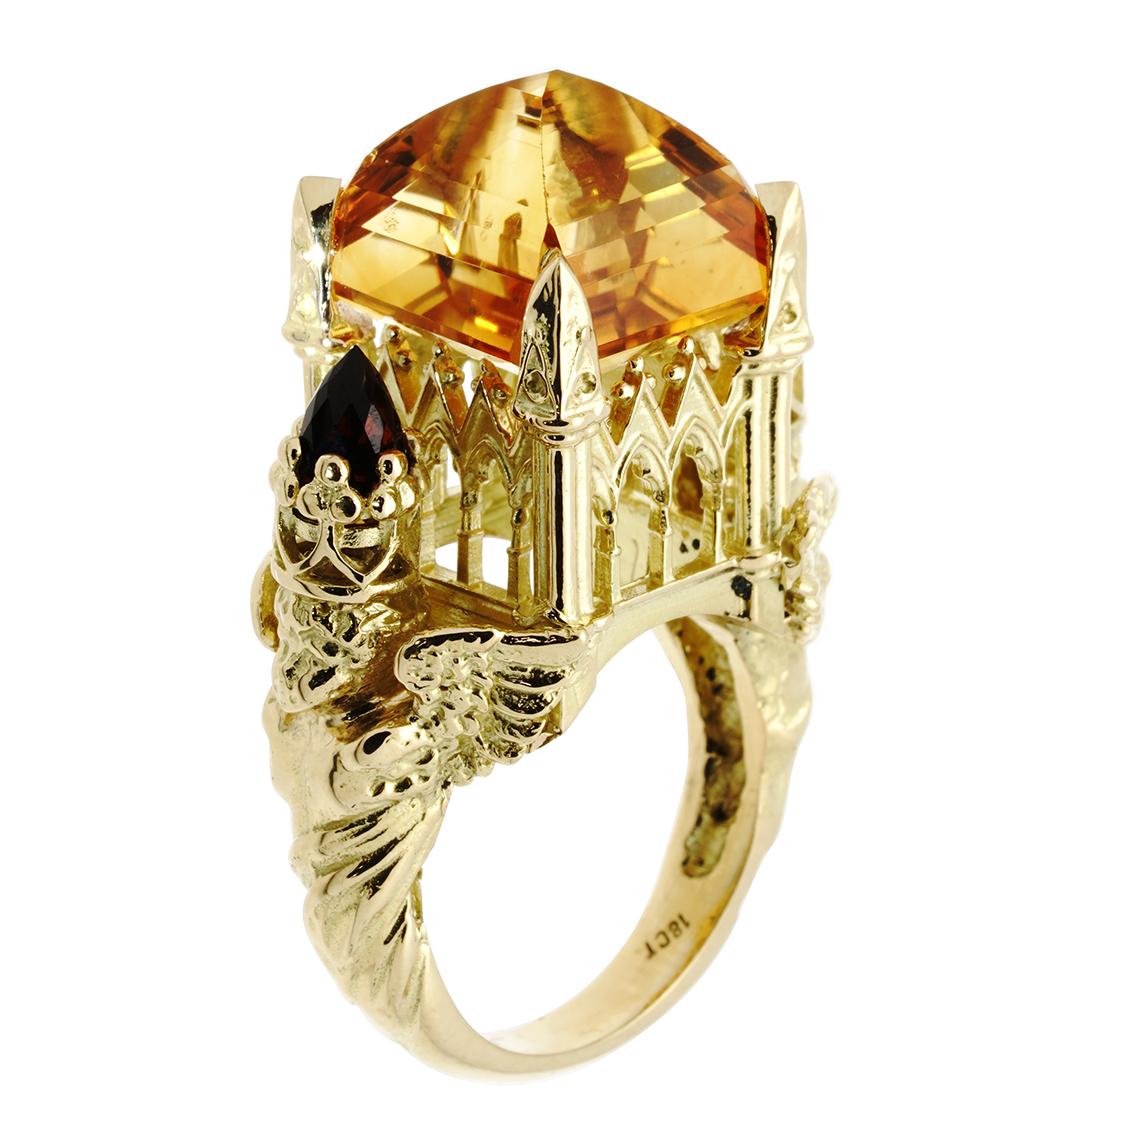 Gothic Cathedral Ring in 18 Karat Yellow Gold, Citrine and Garnets For Sale 1